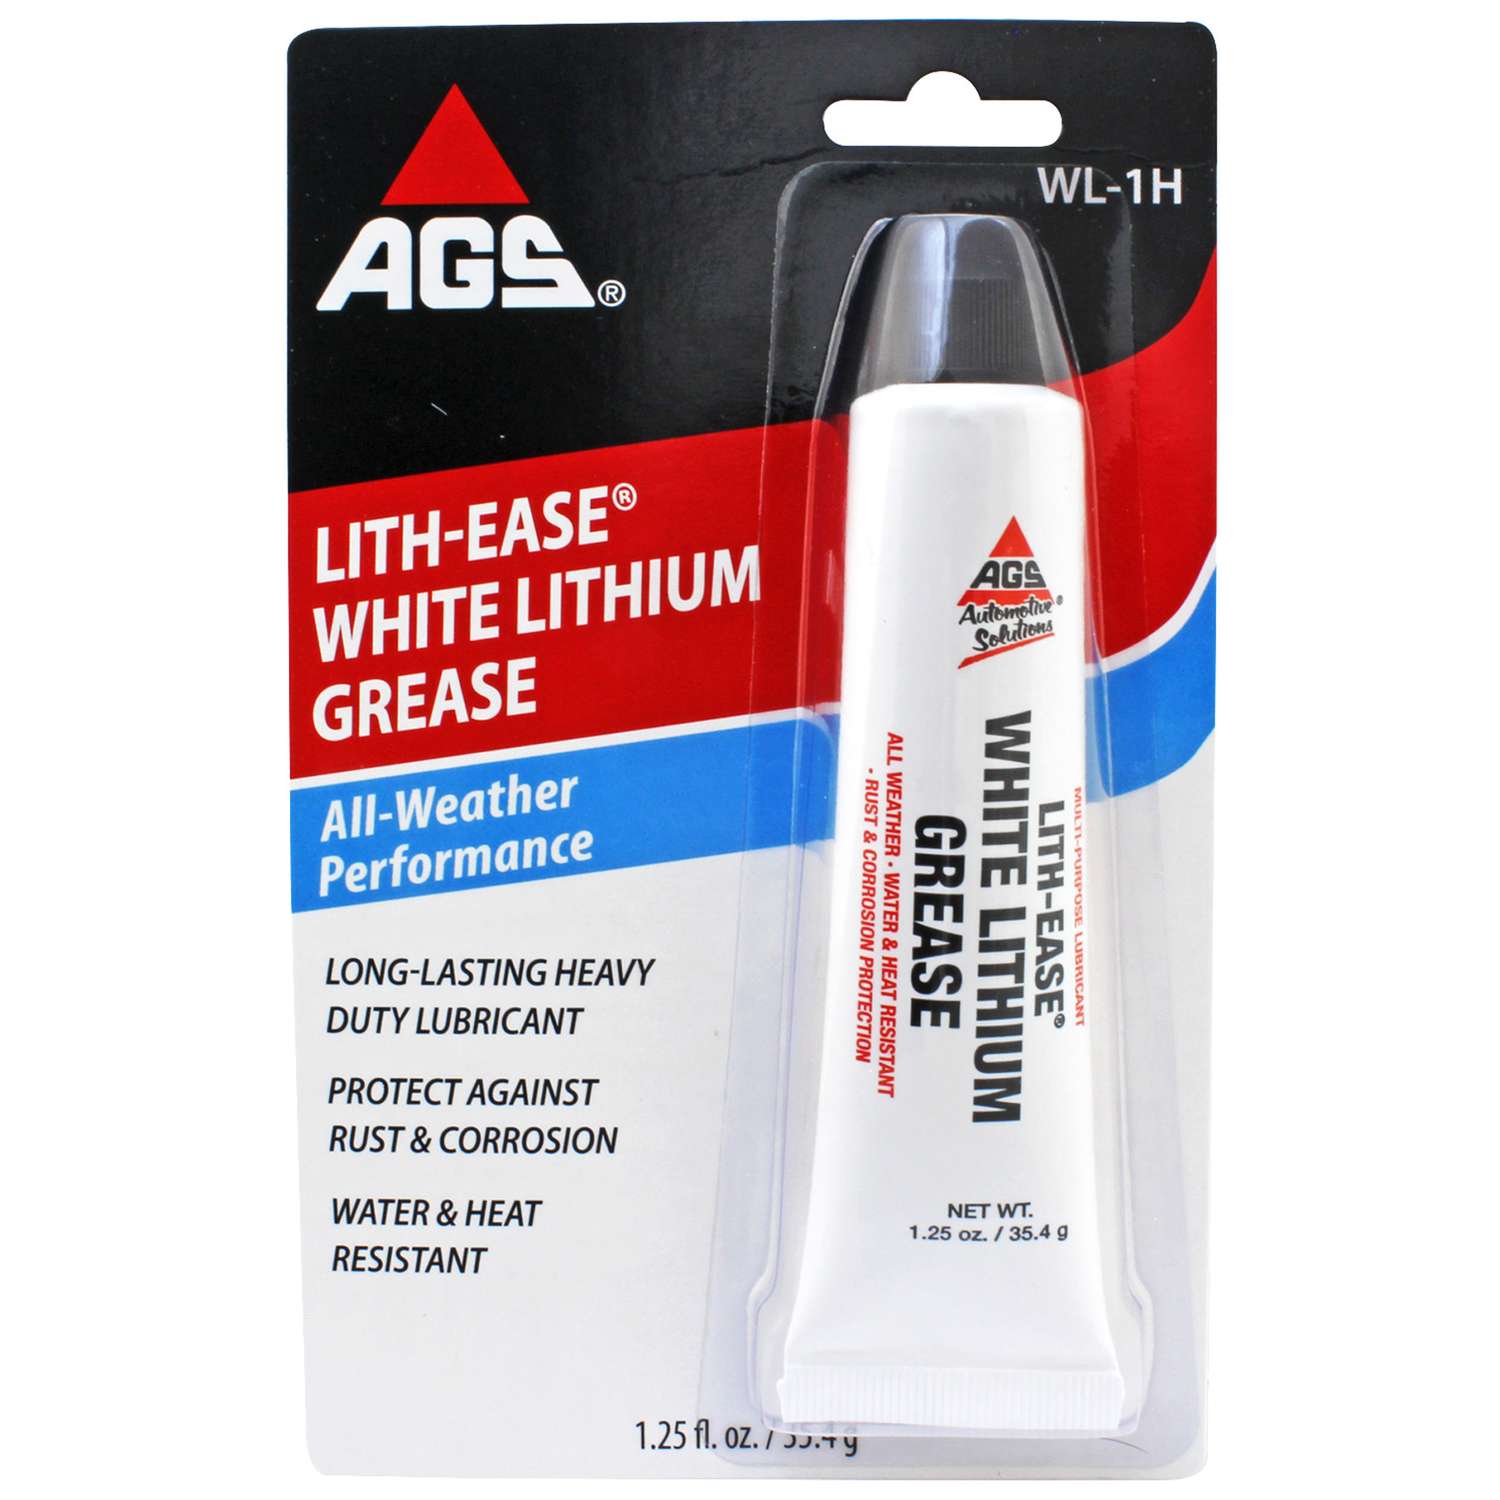 basketball Uenighed adelig AGS Lith-Ease White Lithium Grease 1.25 oz - Ace Hardware